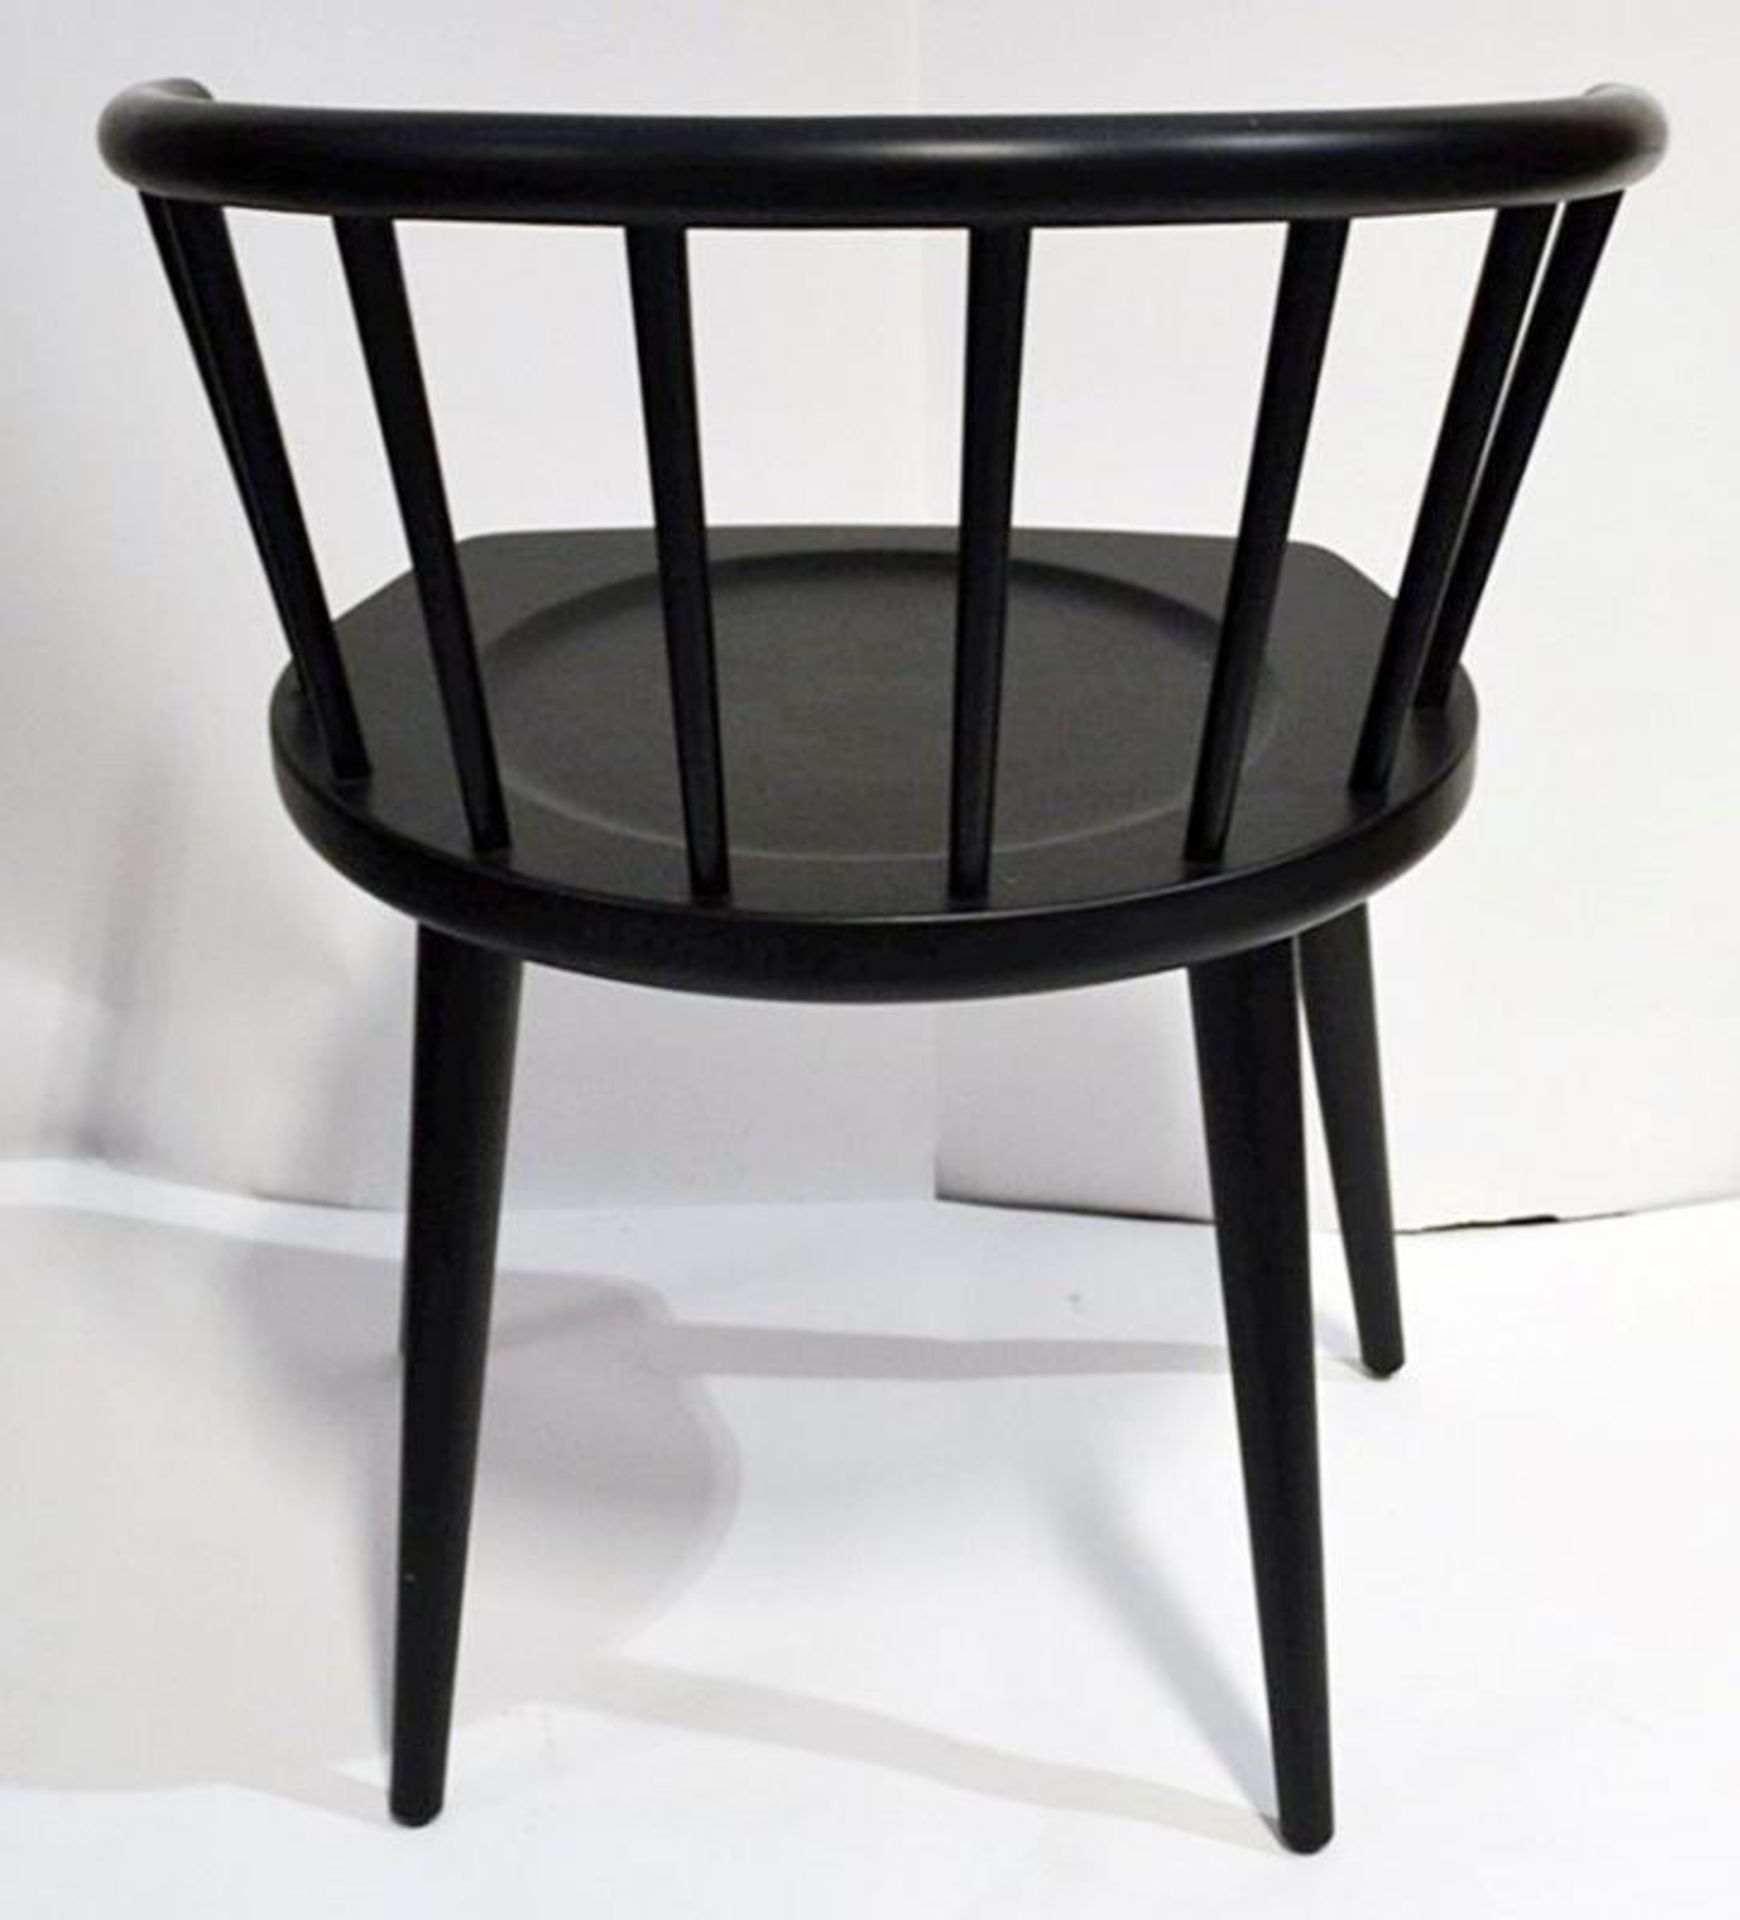 4 x Curved Spindleback Wooden Dining Chairs With Shaped Seats and Dark Finish - Dimensions: H73 x - Image 6 of 6